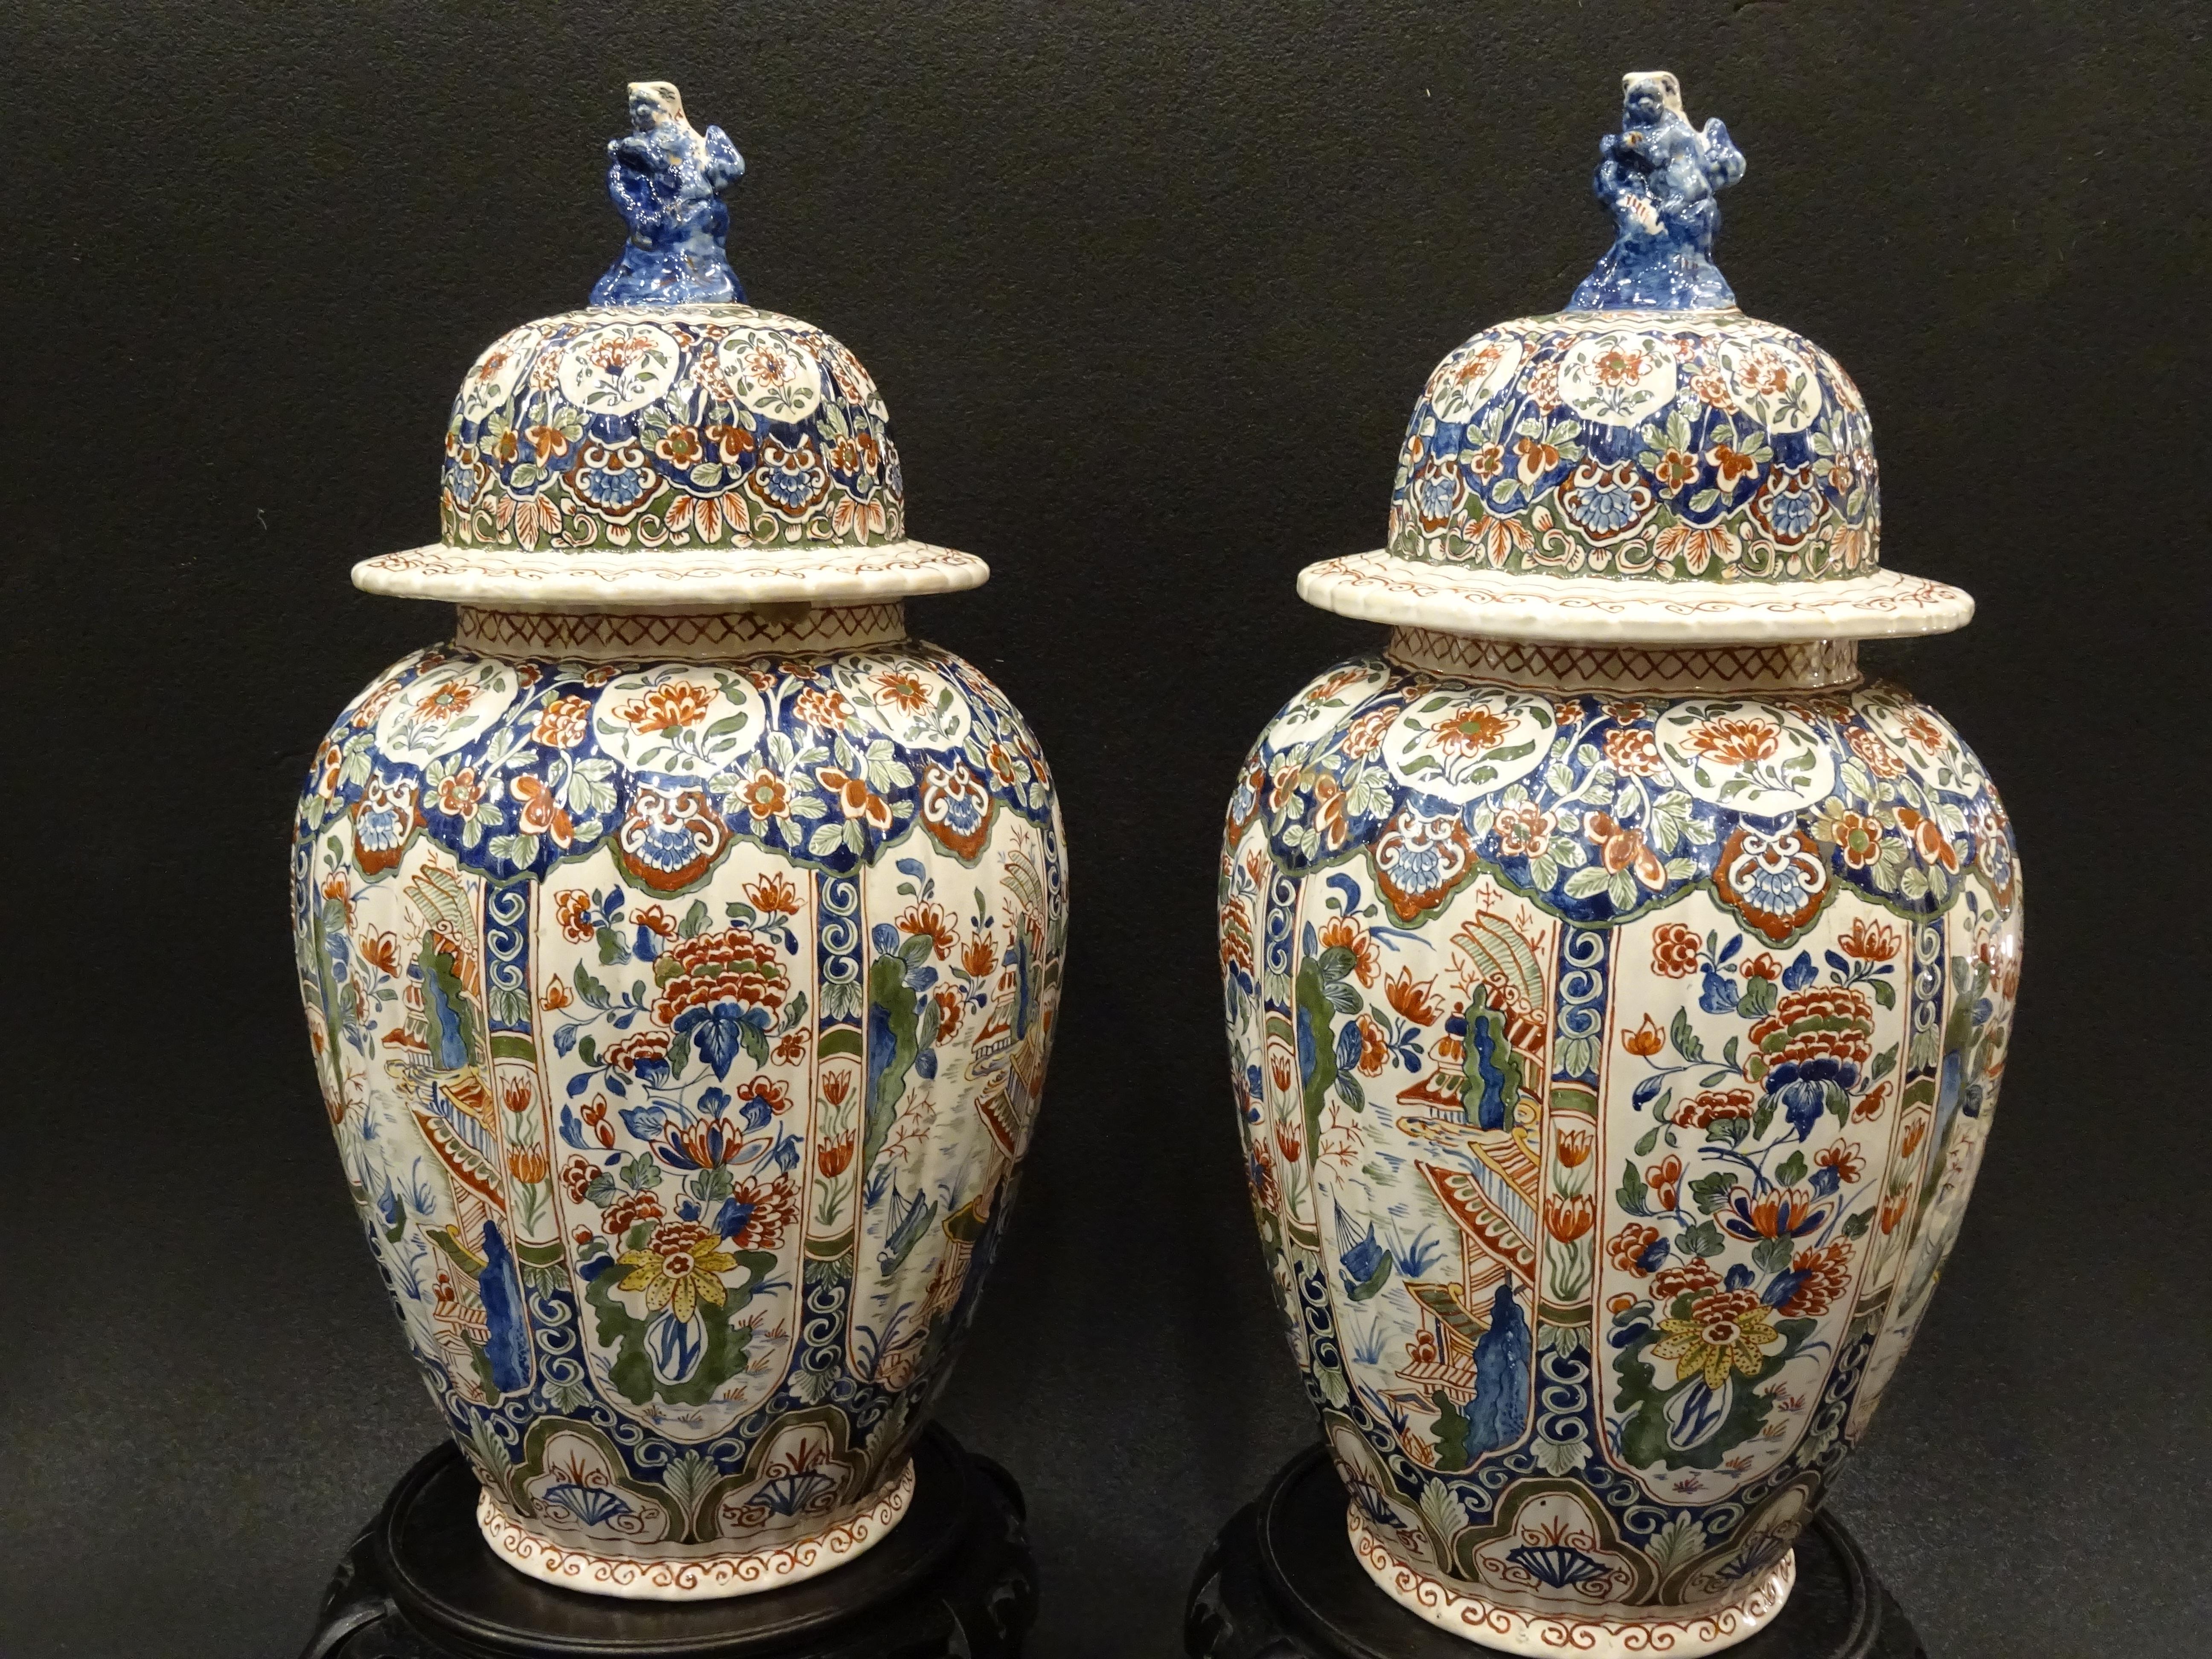 Outstanding pair of great vases or Bucaros with a cover and a base.
They are an extraordinary pair or delft ceramic in the Cashmere palette delft (1700-1720), 18th century, from a very important French private collection.
Their measurement without